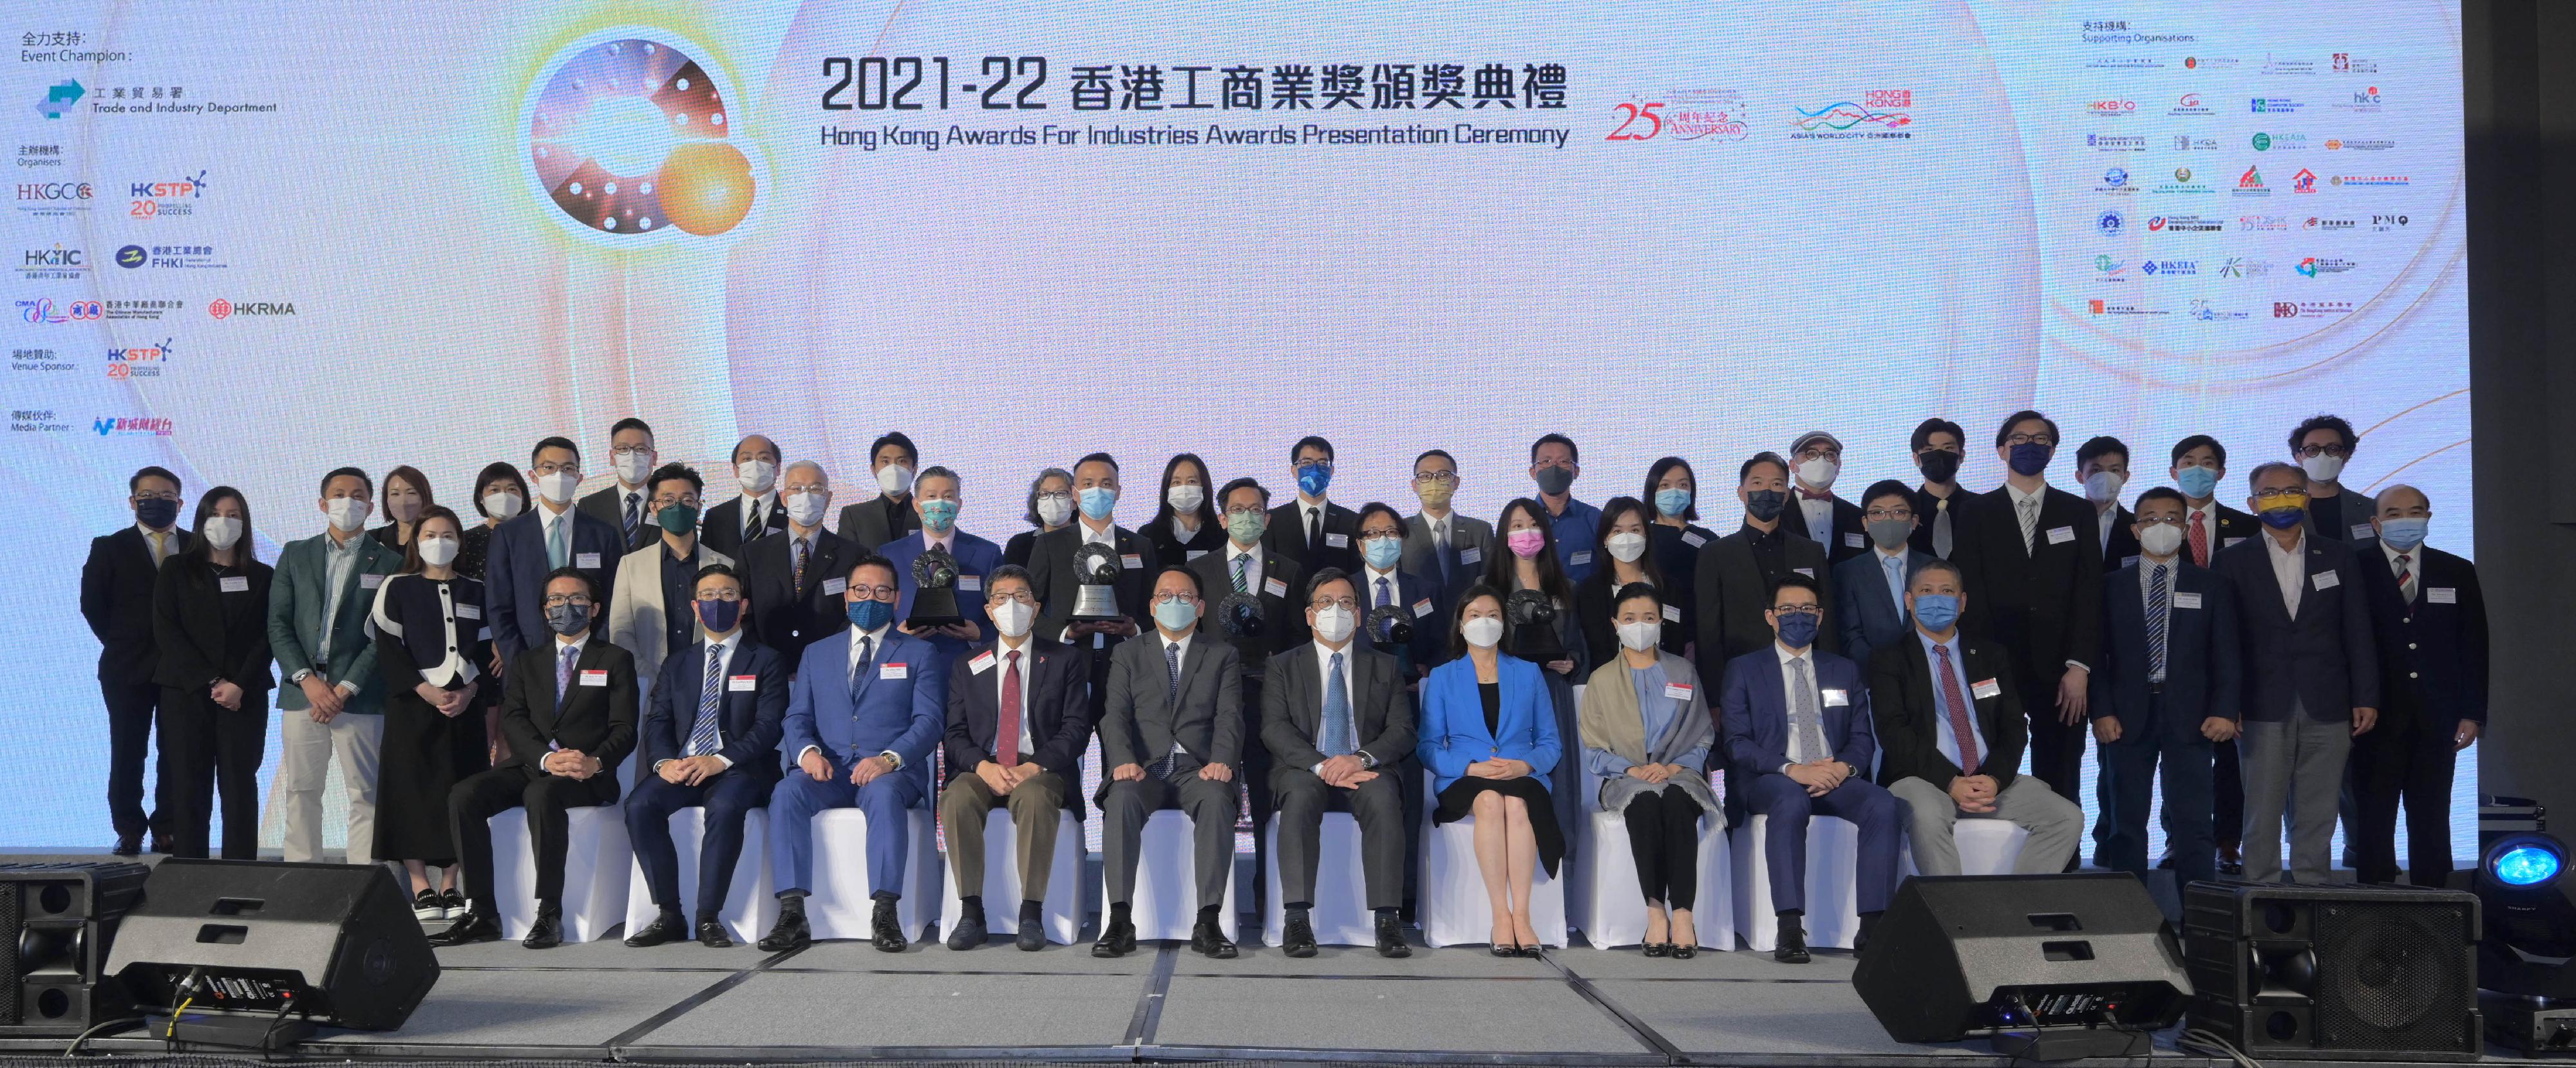 The Chief Secretary for Administration, Mr Chan Kwok-ki, attended the 2021-22 Hong Kong Awards for Industries Awards Presentation Ceremony today (November 28). Photo shows (first row, from left) the Chairman of the Design Council of Hong Kong, Mr Ken Fung; the President of the Hong Kong Young Industrialists Council, Mr Geoffrey Kao; the President of the Chinese Manufacturers’ Association of Hong Kong, Dr Allen Shi; the Chairman of the Final Judging Panels of the 2021-22 Hong Kong Awards for Industries, Professor Way Kuo; Mr Chan; the Secretary for Commerce and Economic Development, Mr Algernon Yau; the Director-General of Trade and Industry, Ms Maggie Wong; the Chairman of the Hong Kong Retail Management Association, Mrs Annie Tse; the Chairman of the Industry & Technology Committee of the Hong Kong General Chamber of Commerce, Mr Victor Lam; and the Head of Business Development of the Hong Kong Science and Technology Parks Corporation, Mr Oscar Wong with the representatives of award winners. 